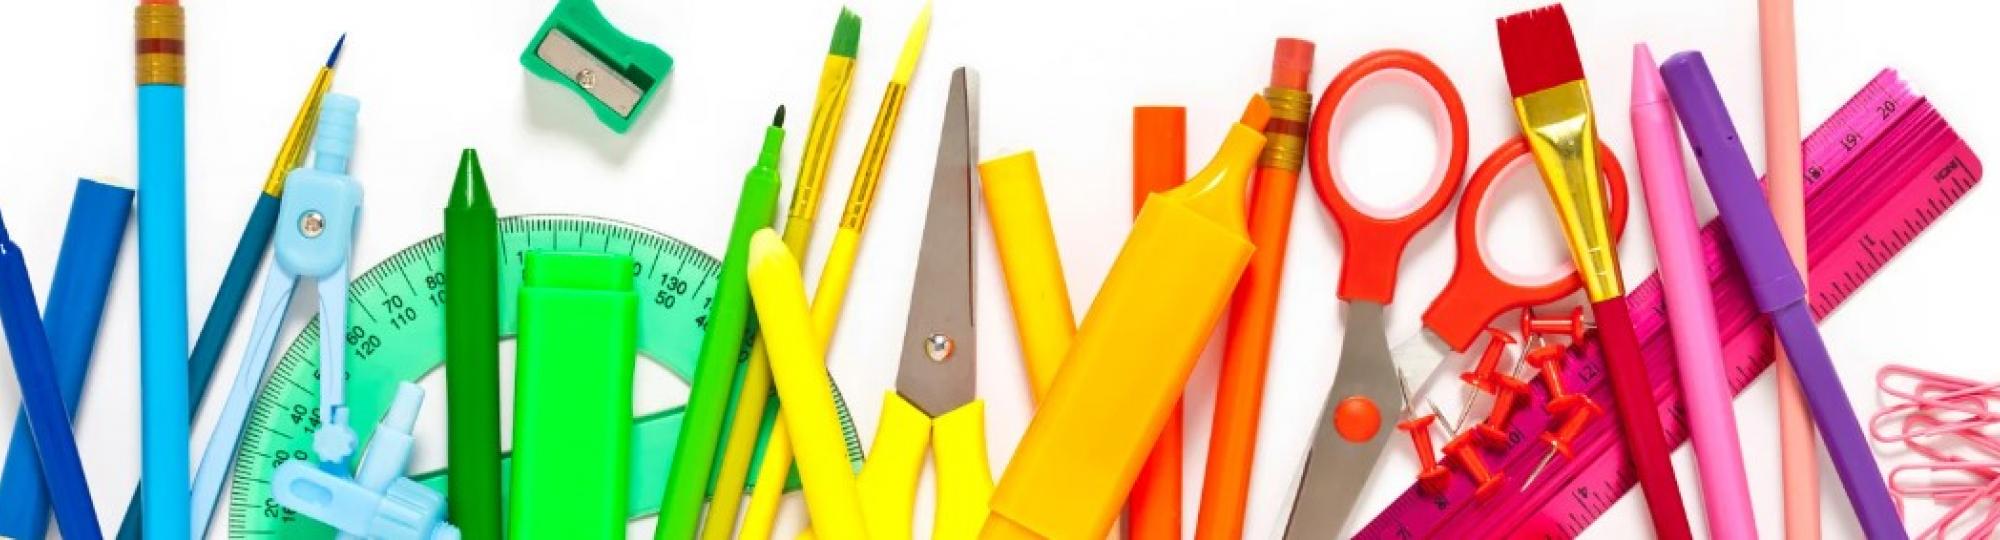 Picture of school supplies like pencils, notebooks and scissors